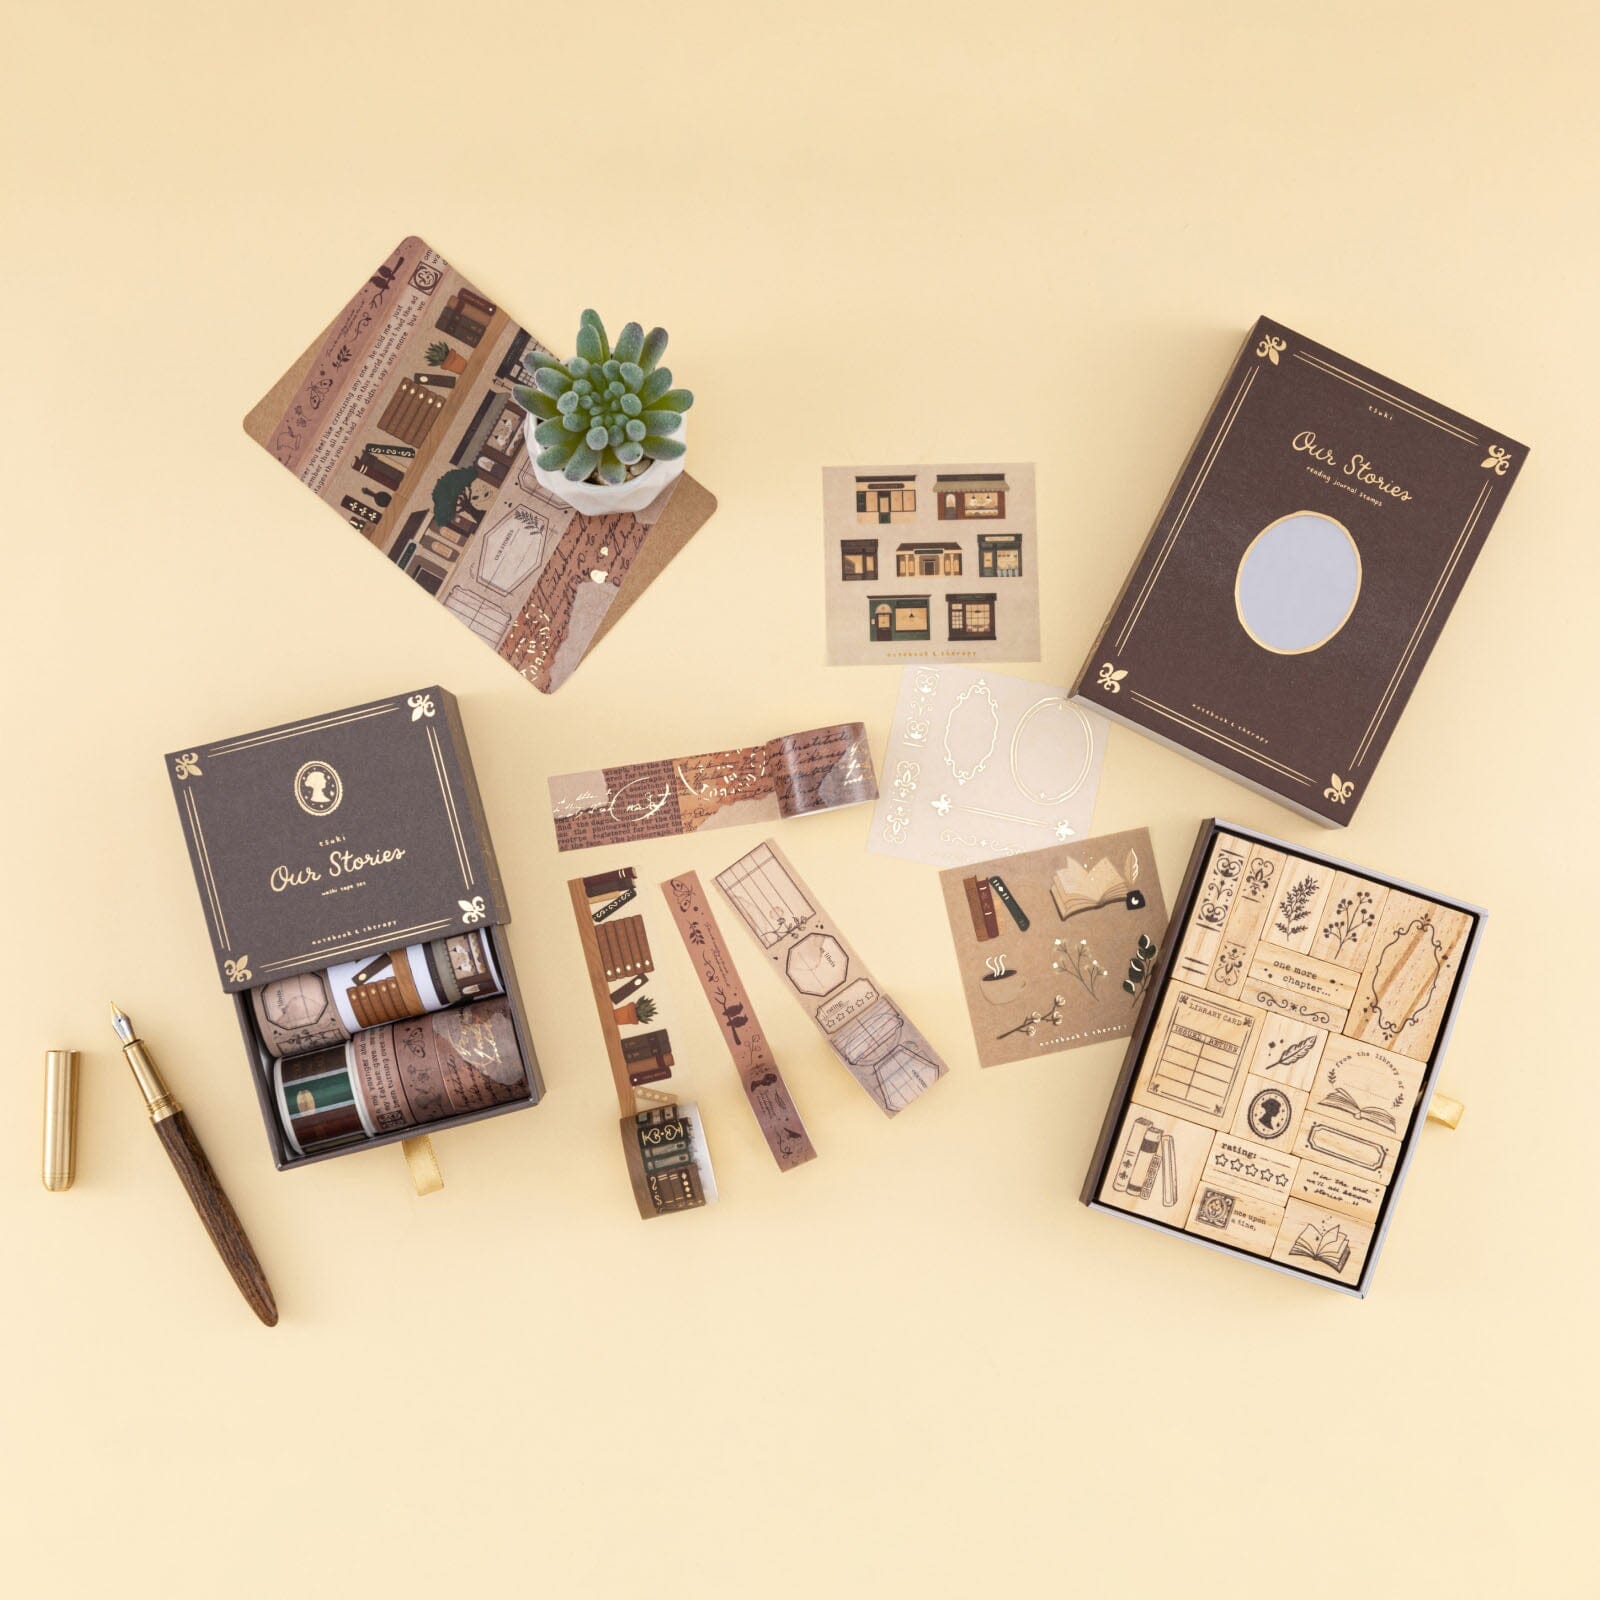  Our Stories collection flatlay with washi tapes and rubber stamps